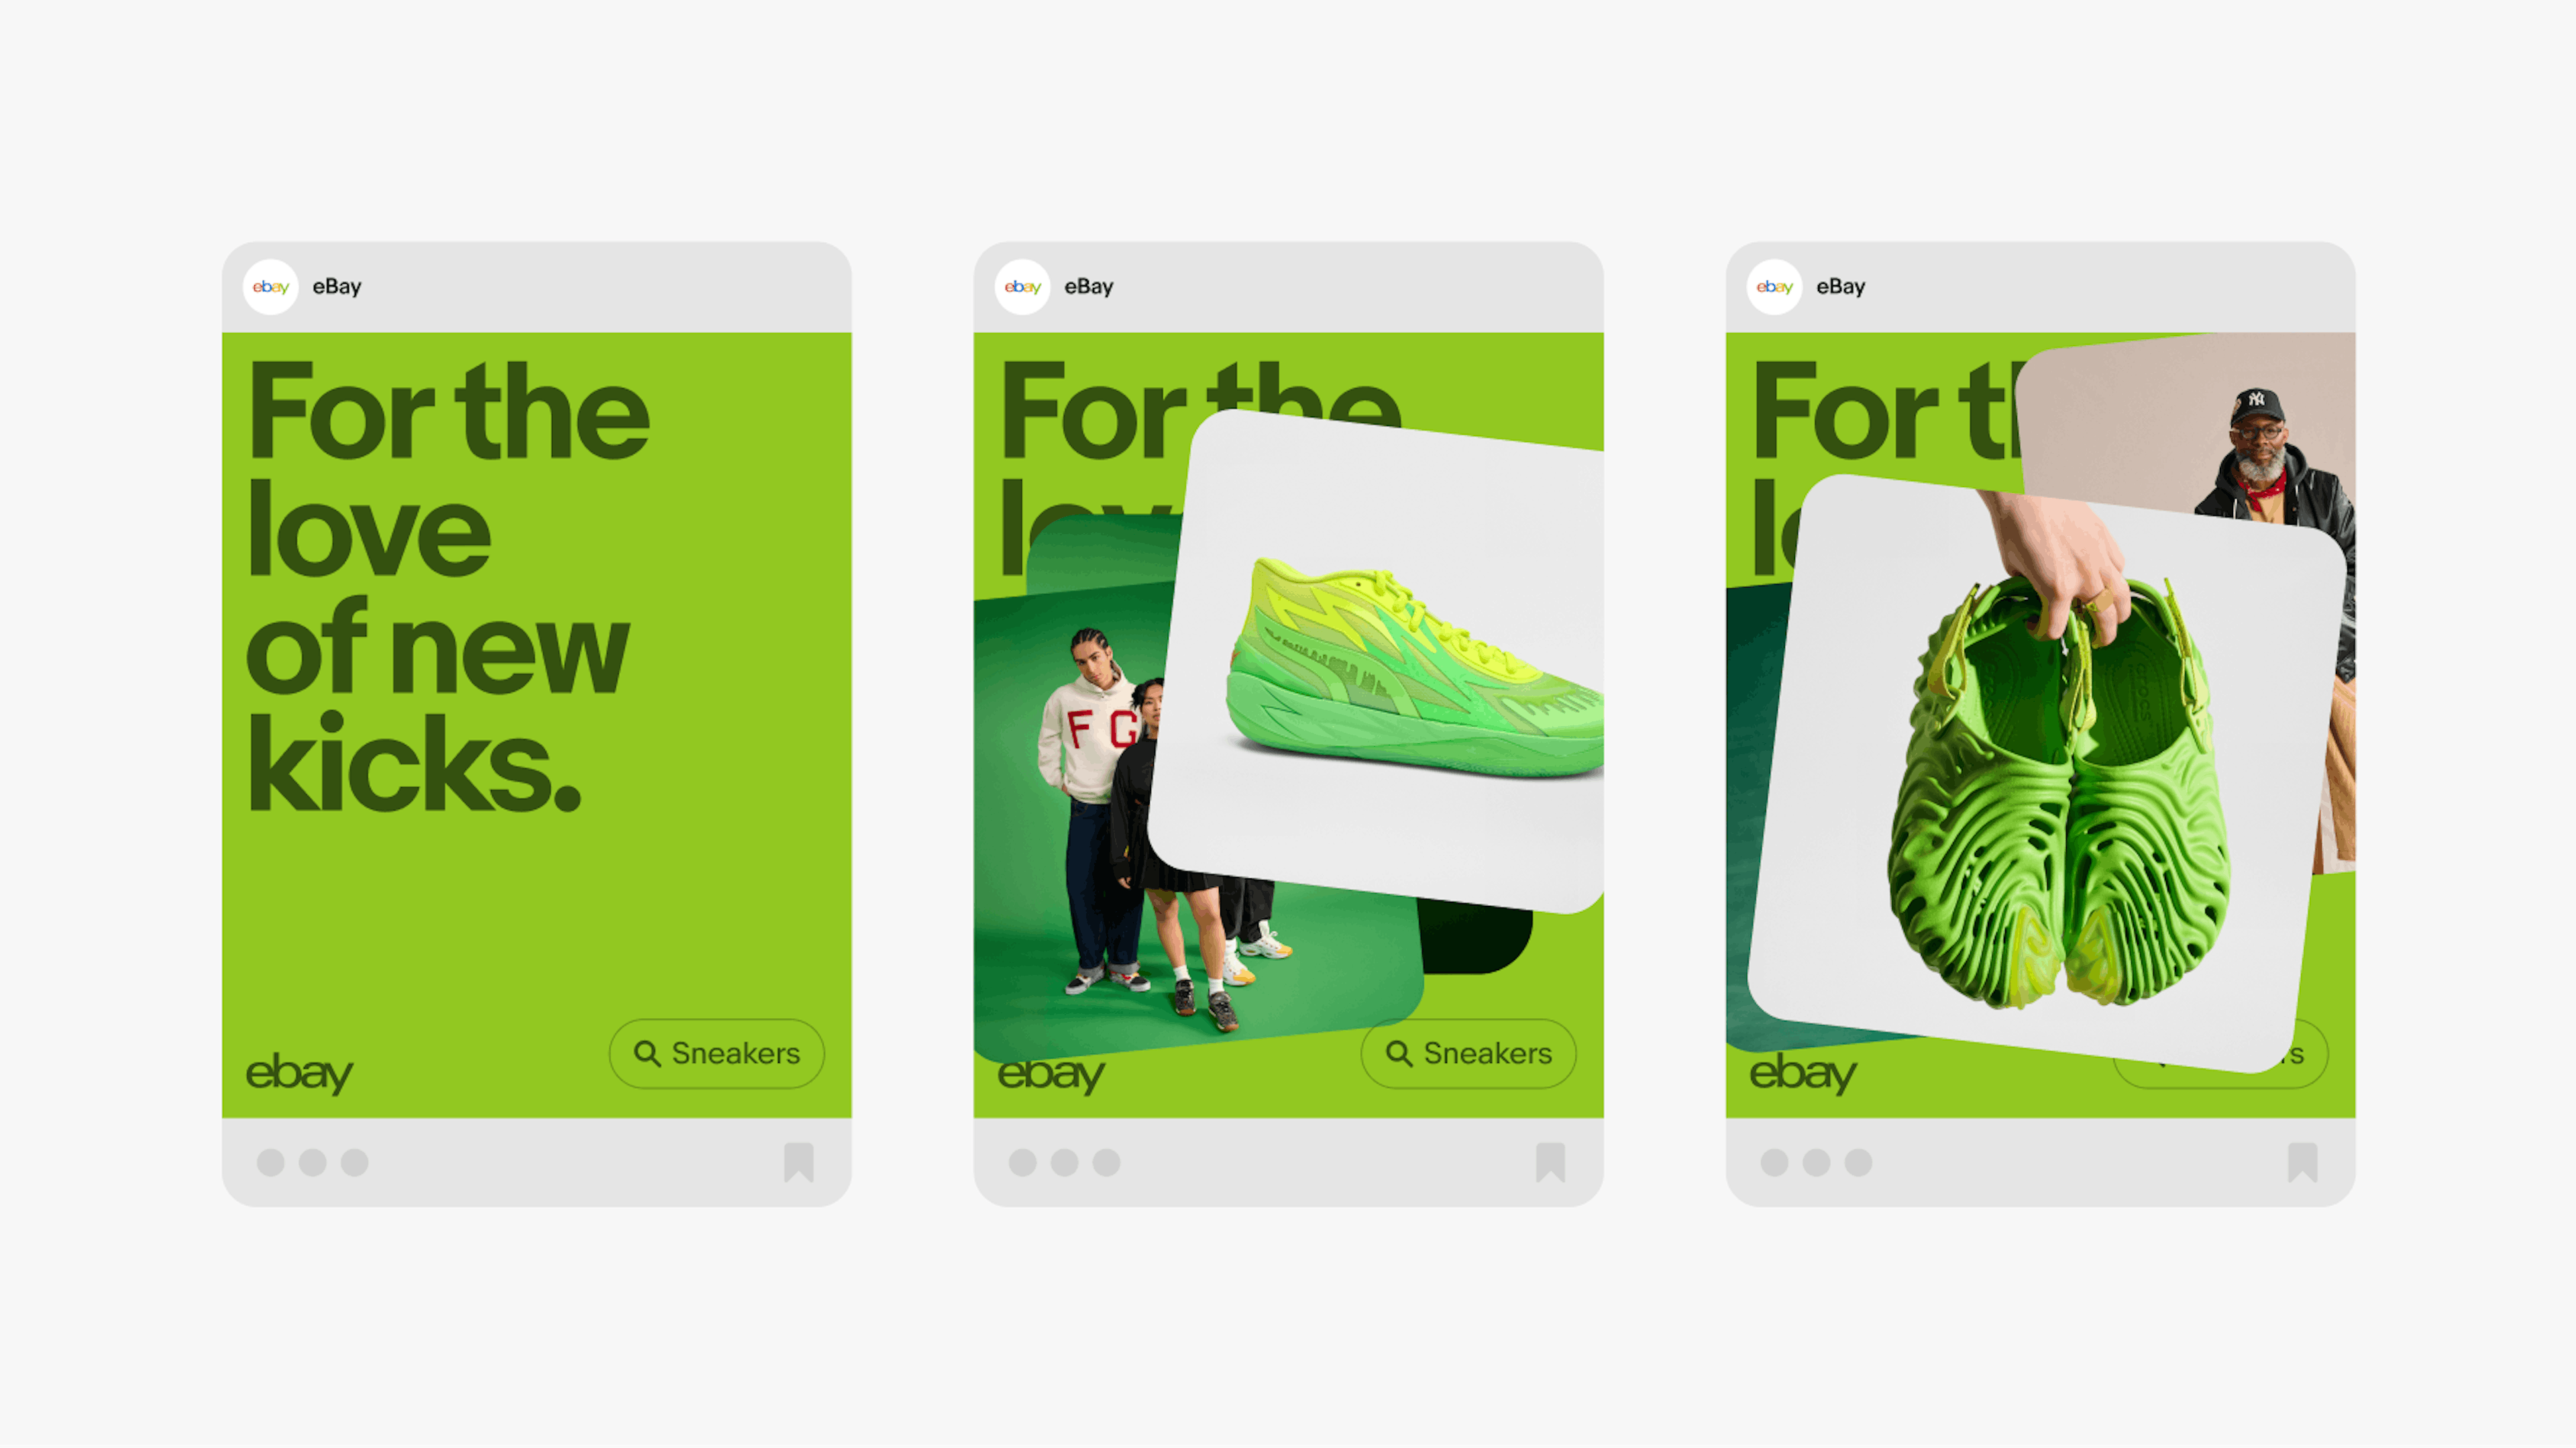 An lime green instagram post for eBay promoting sneakers with the text "For the love of new kicks." It features images of green sneakers and people modeling different pairs of green shoes.